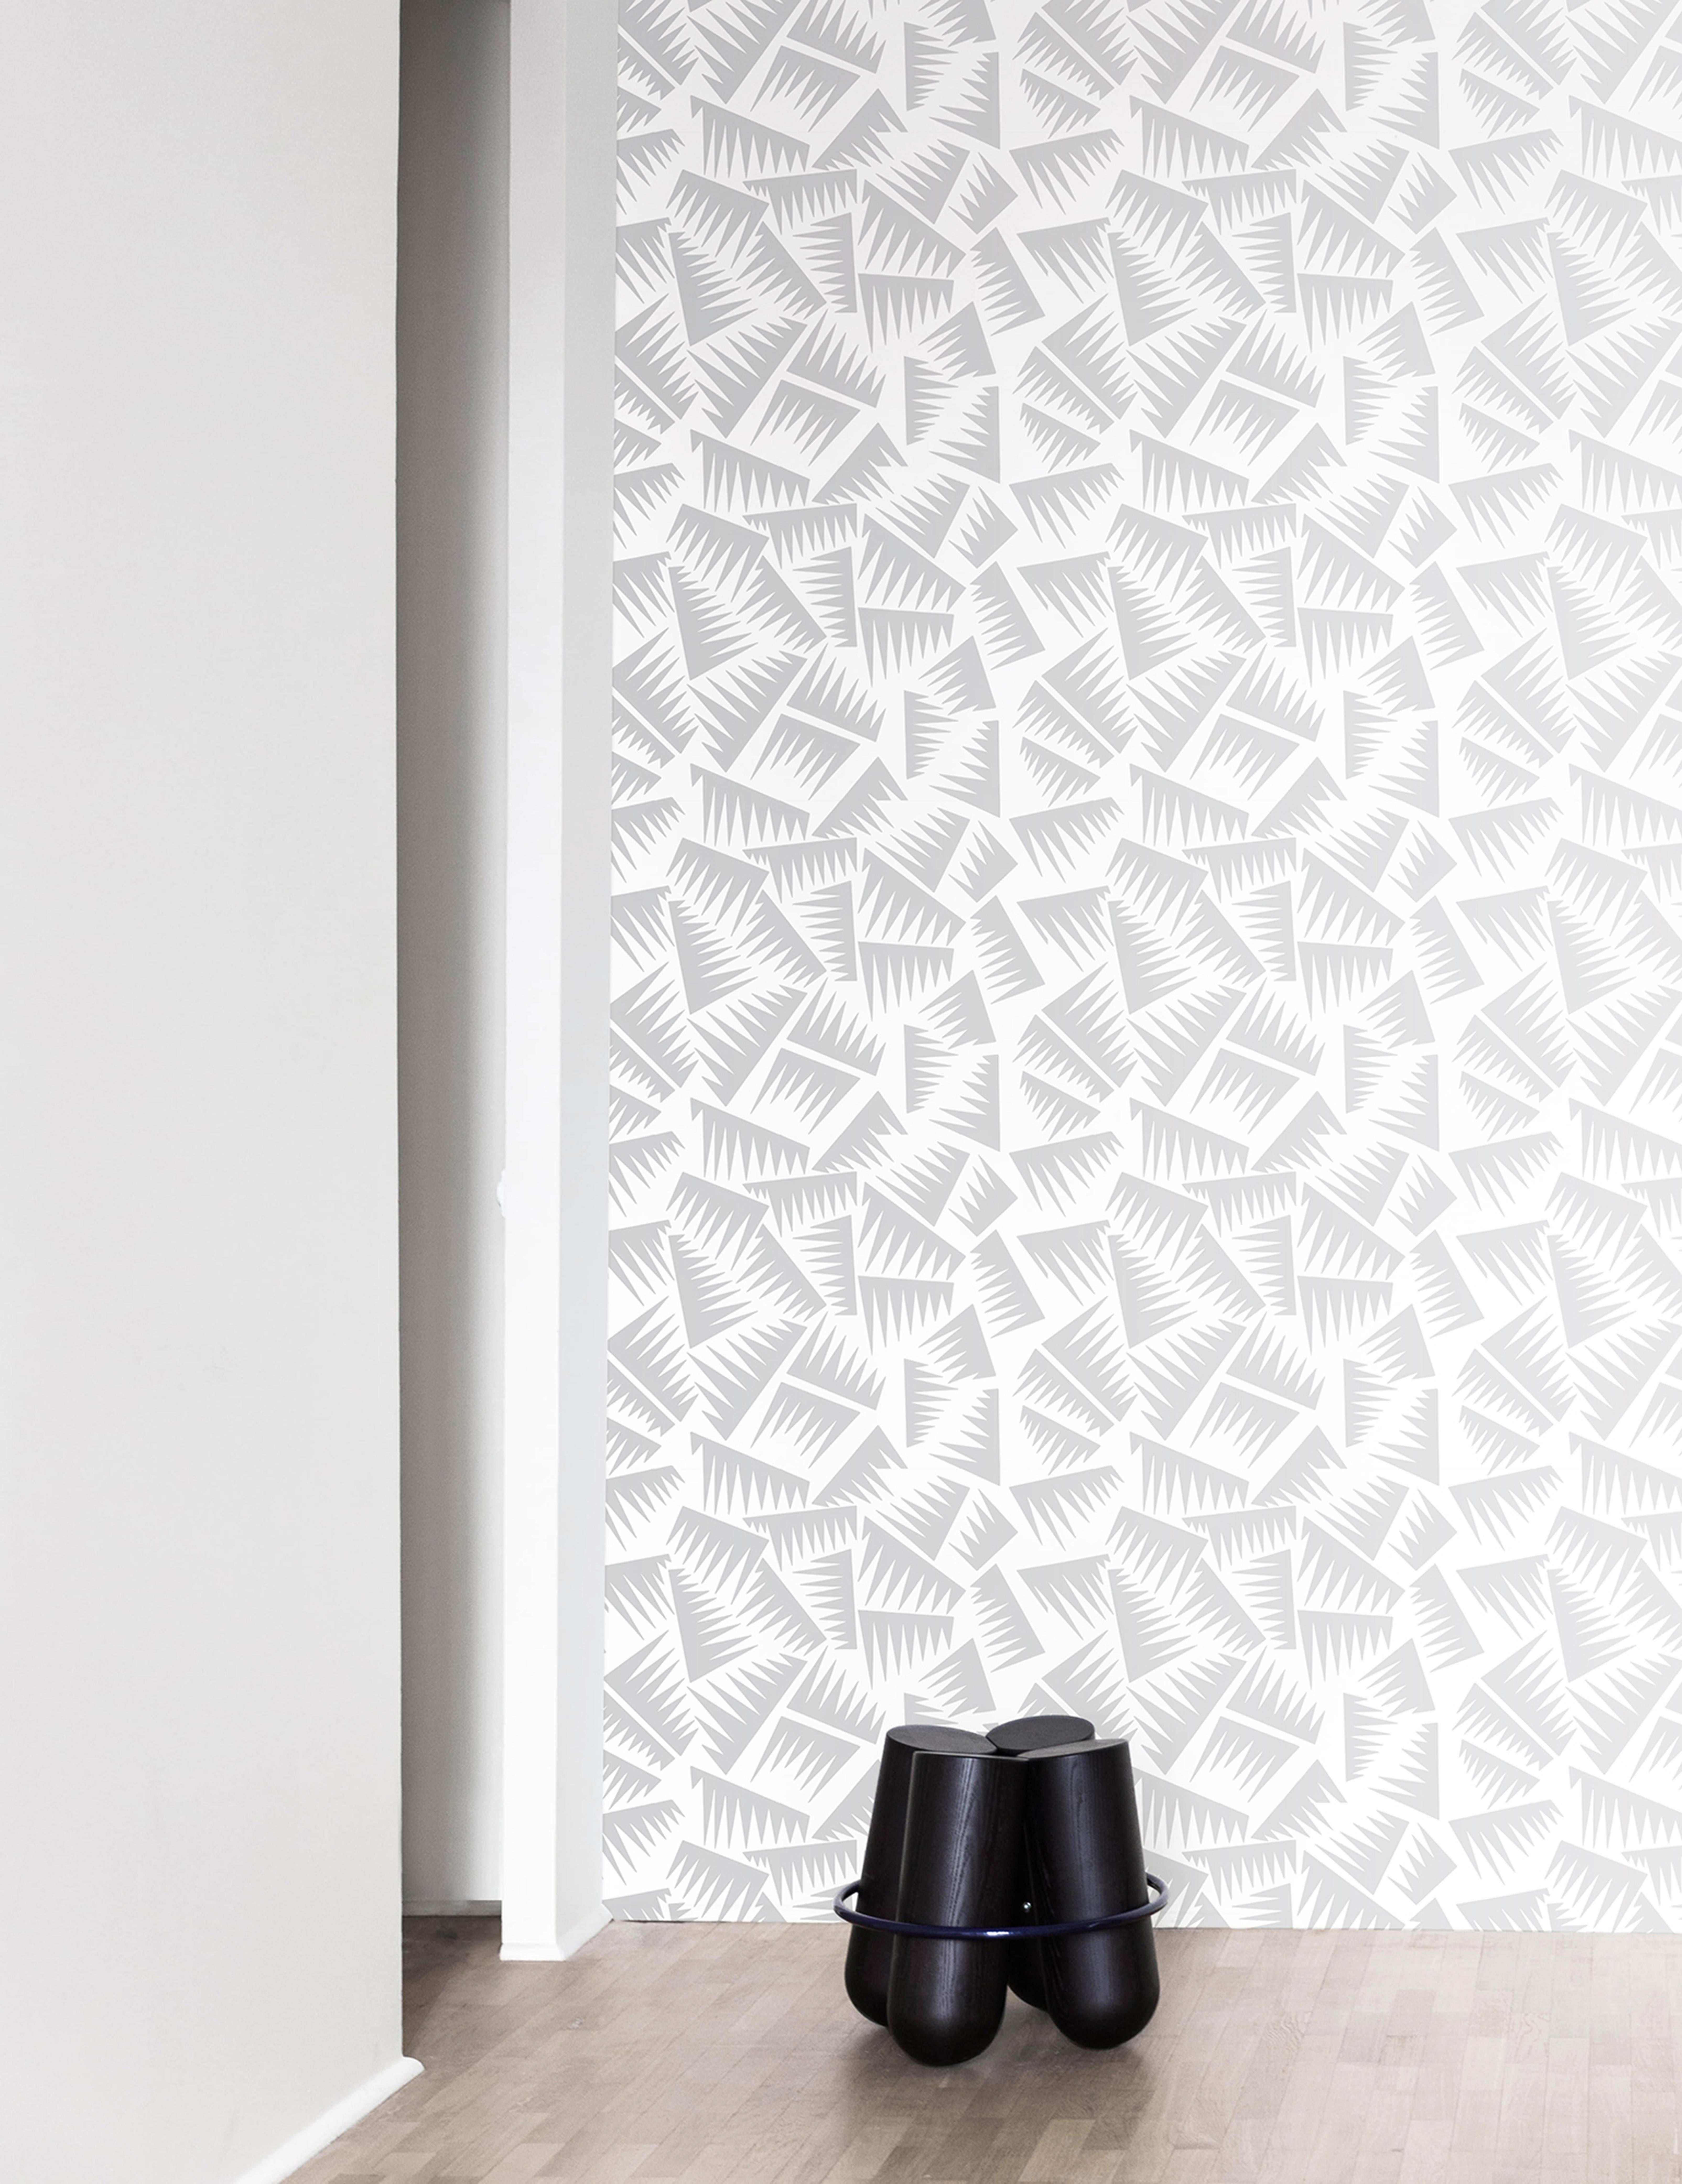 JER is a wallpaper which pattern was designed during the roaring twenties by Art Déco superstar Jacques Emile Ruhlmann, originally for a rug and wall decors. La Chance re edited this elegant and ultra-modern pattern and developed it in contemporary